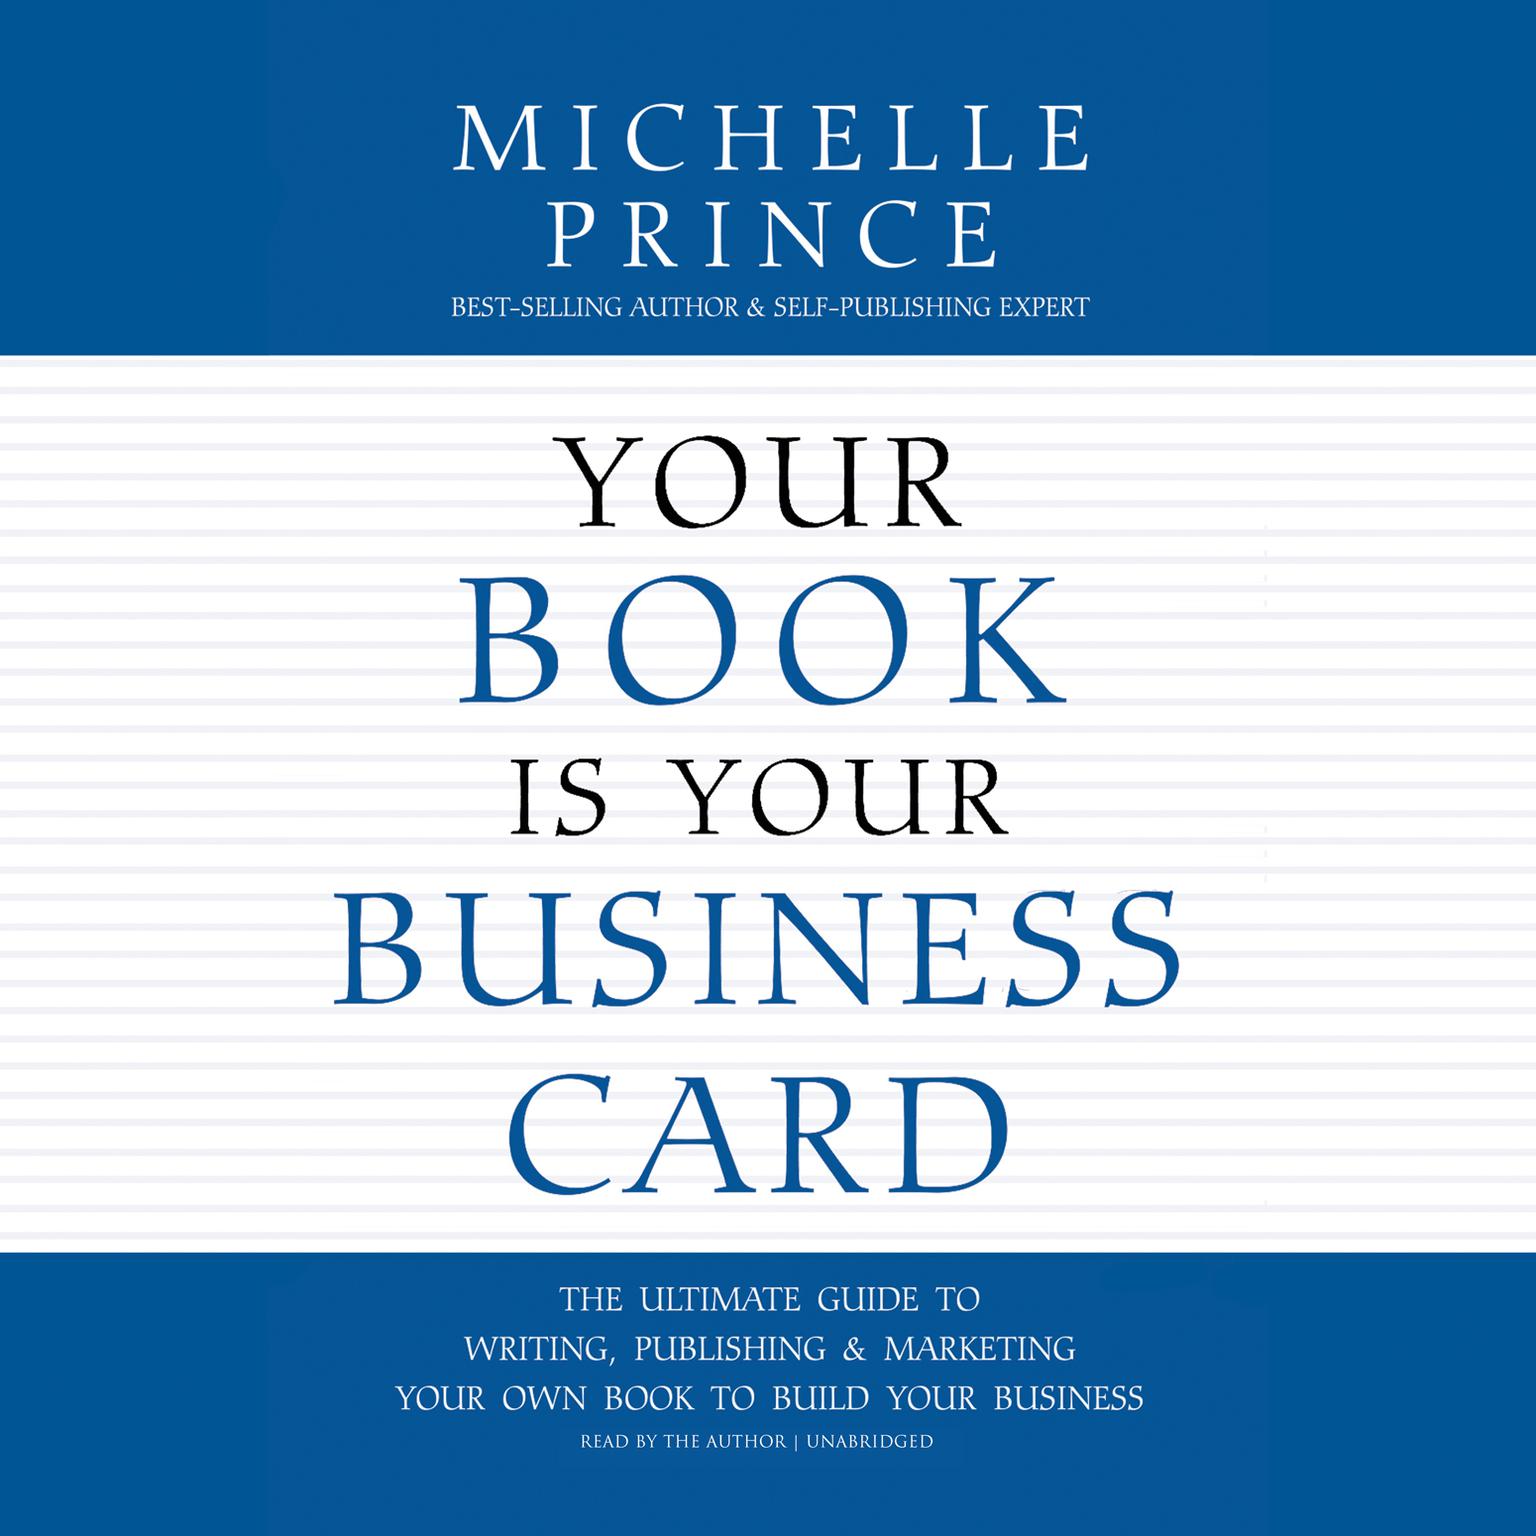 Your Book Is Your Business Card: The Ultimate Guide to Writing, Publishing & Marketing Your Own Book to Build Your Business Audiobook, by Michelle Prince